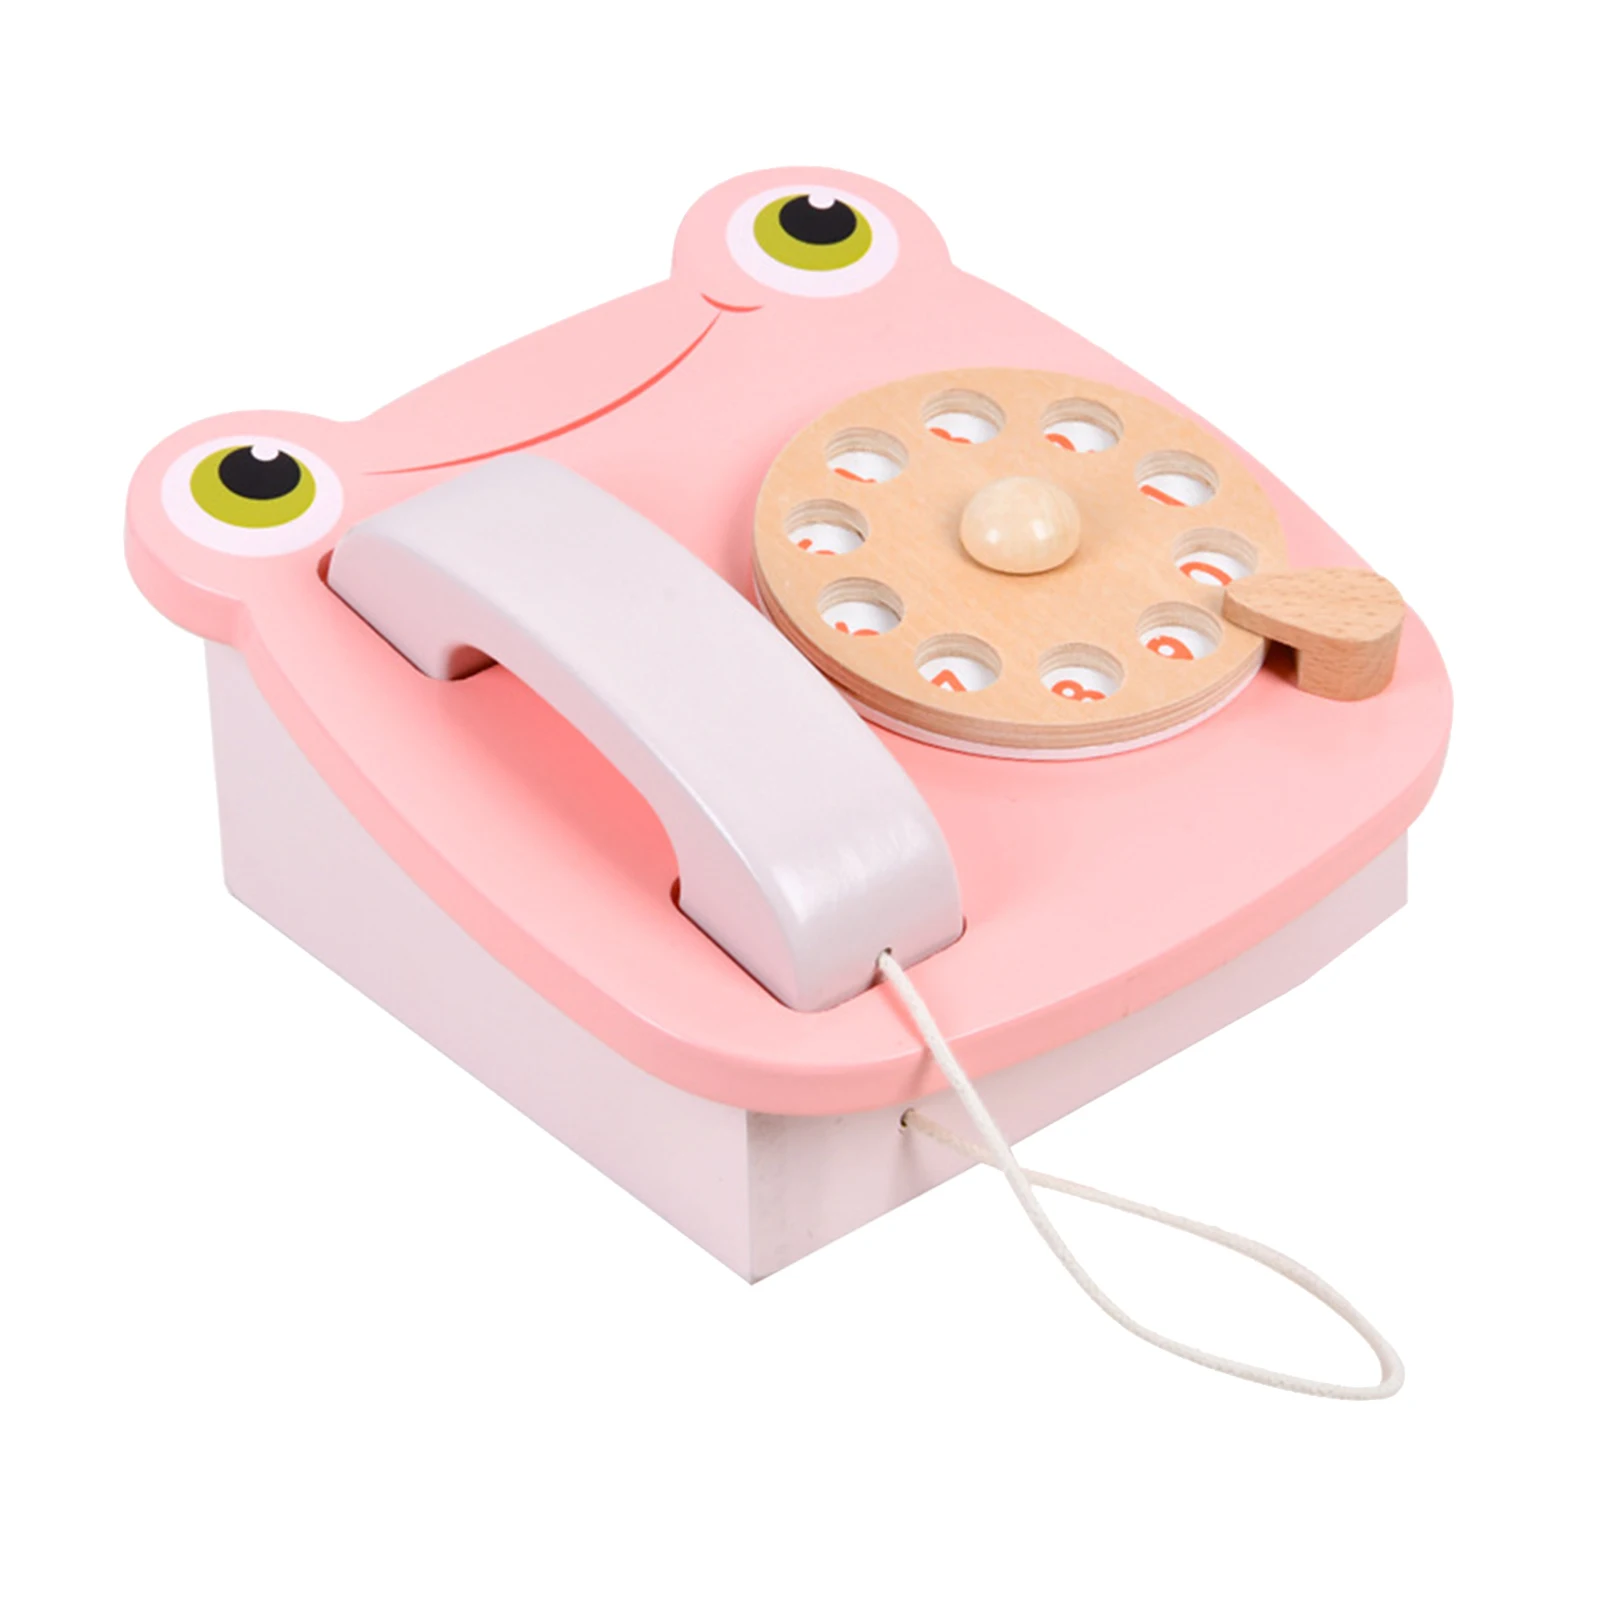 Frog Telephone Toy Simulation Play Phone Game Toys Emotion Cultivation